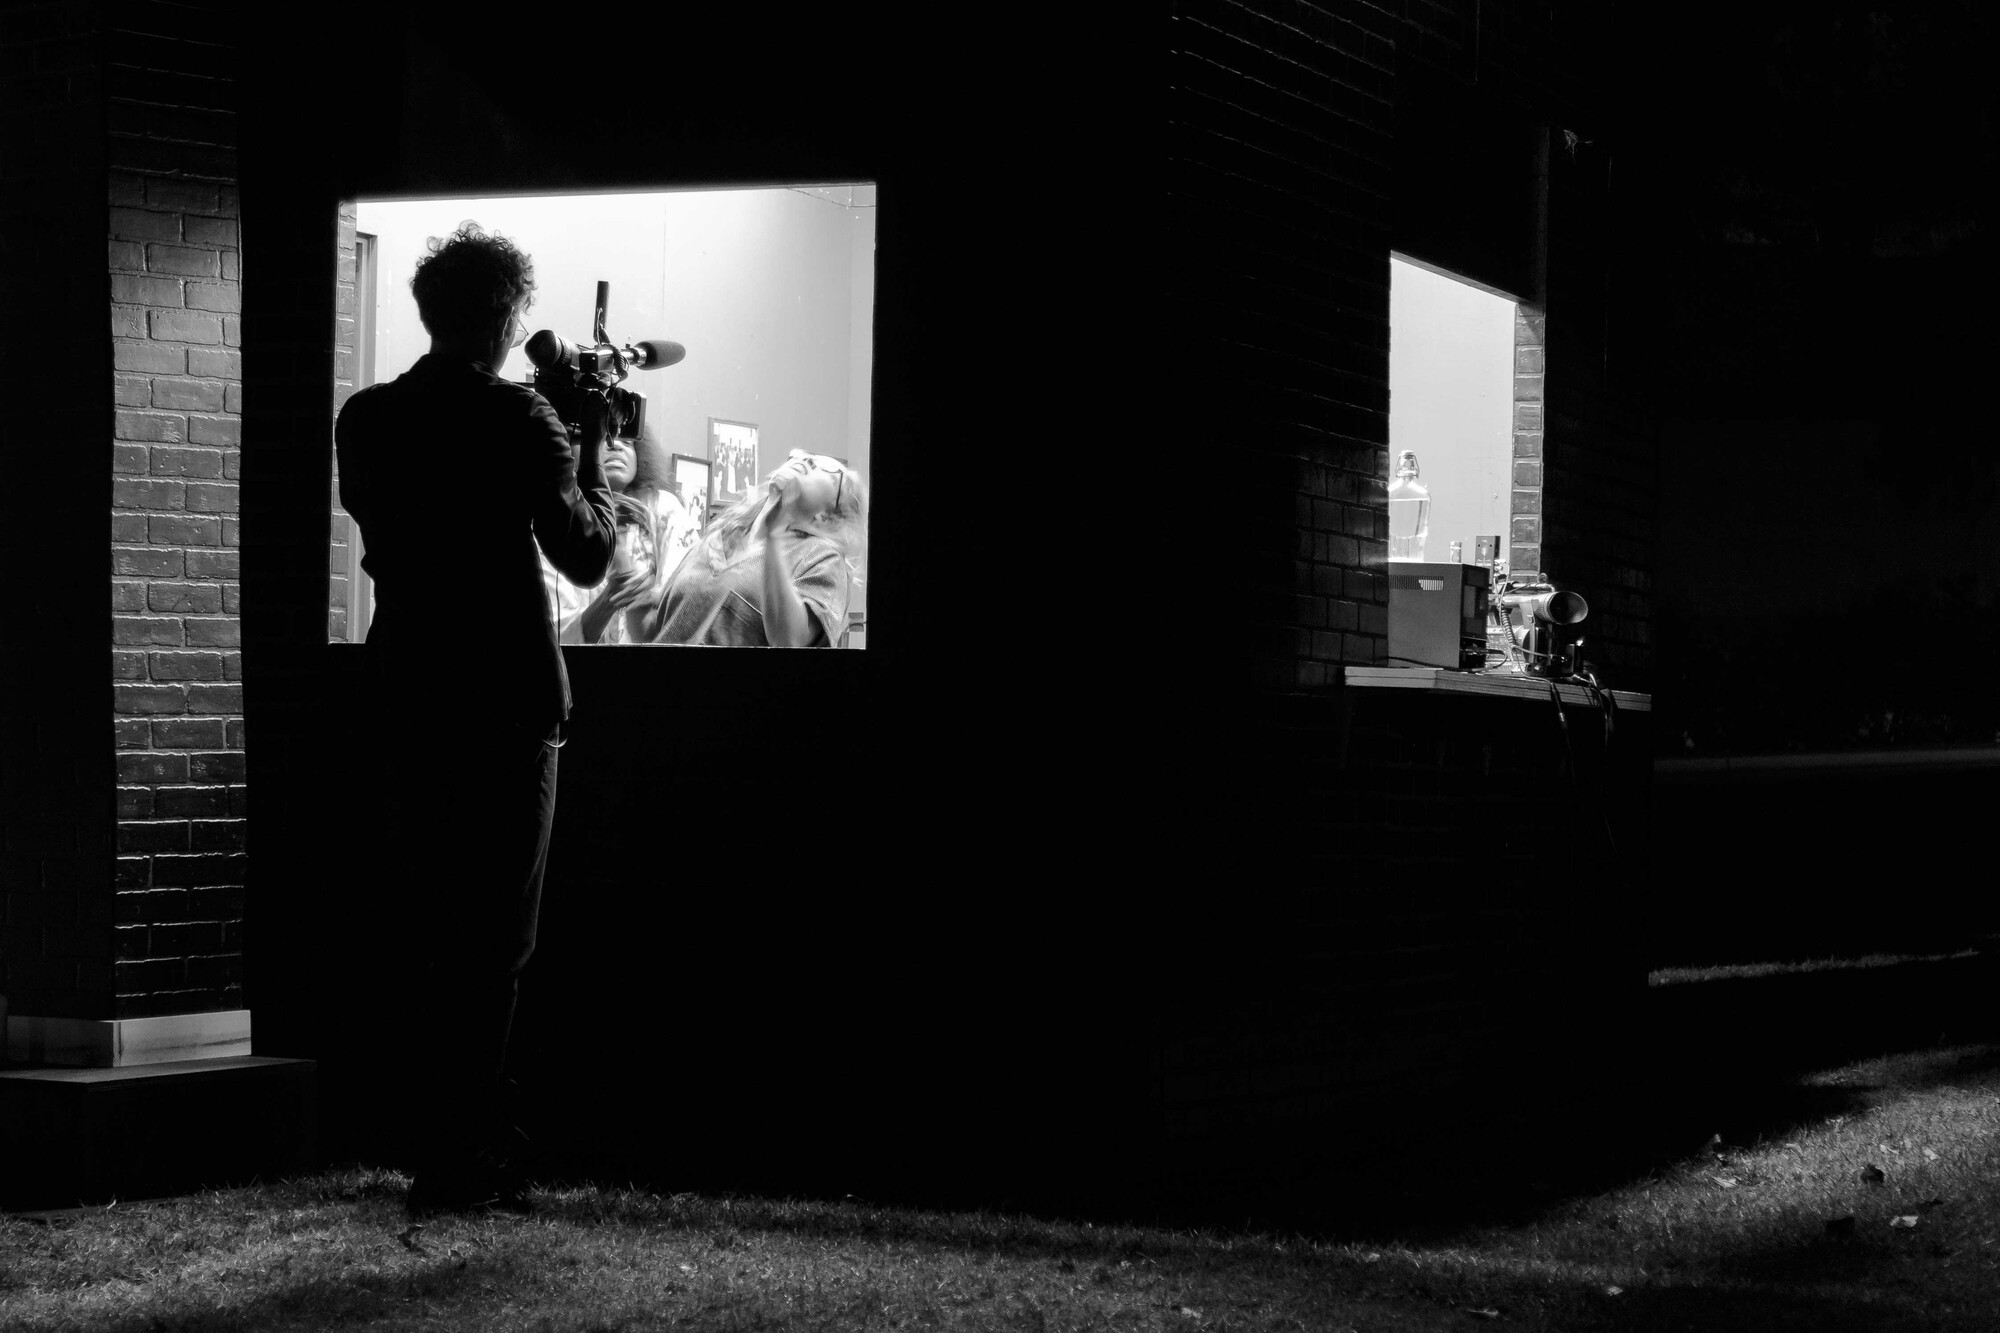 A man in silhouette films two actors performing behind a screen.